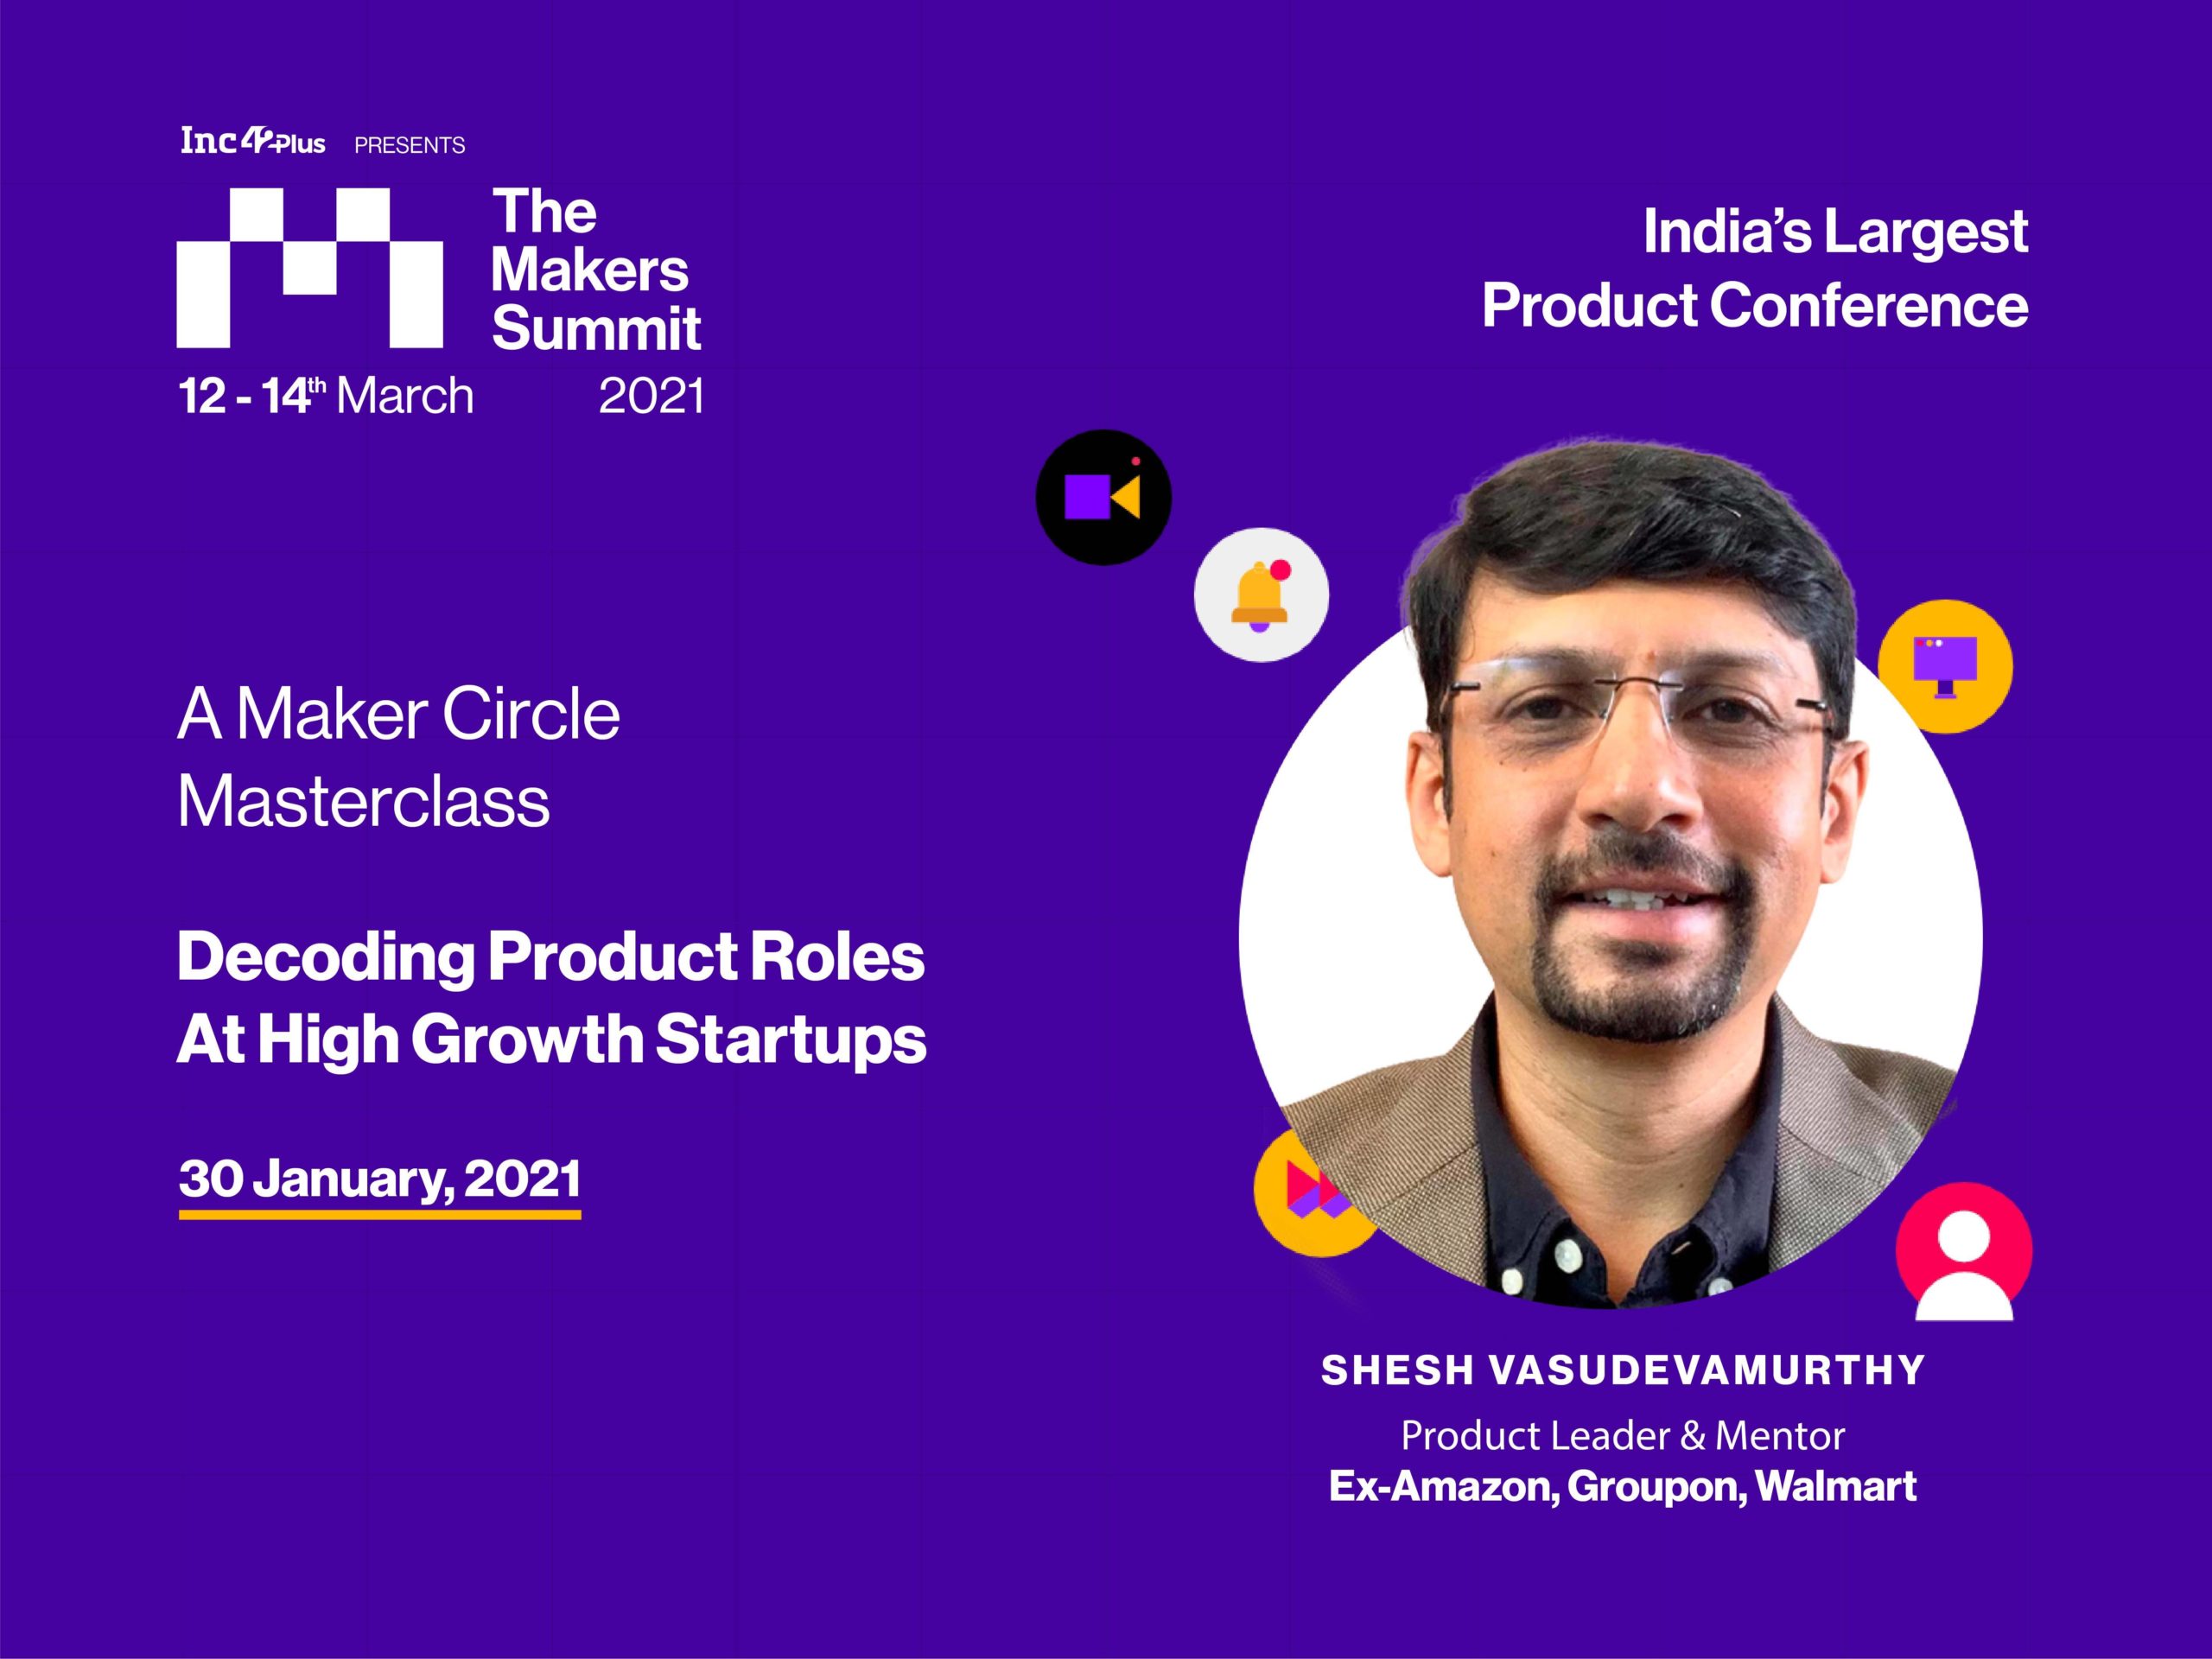 Register For The Maker Circles Masterclass On 'Decoding Product Roles At High Growth Startups'